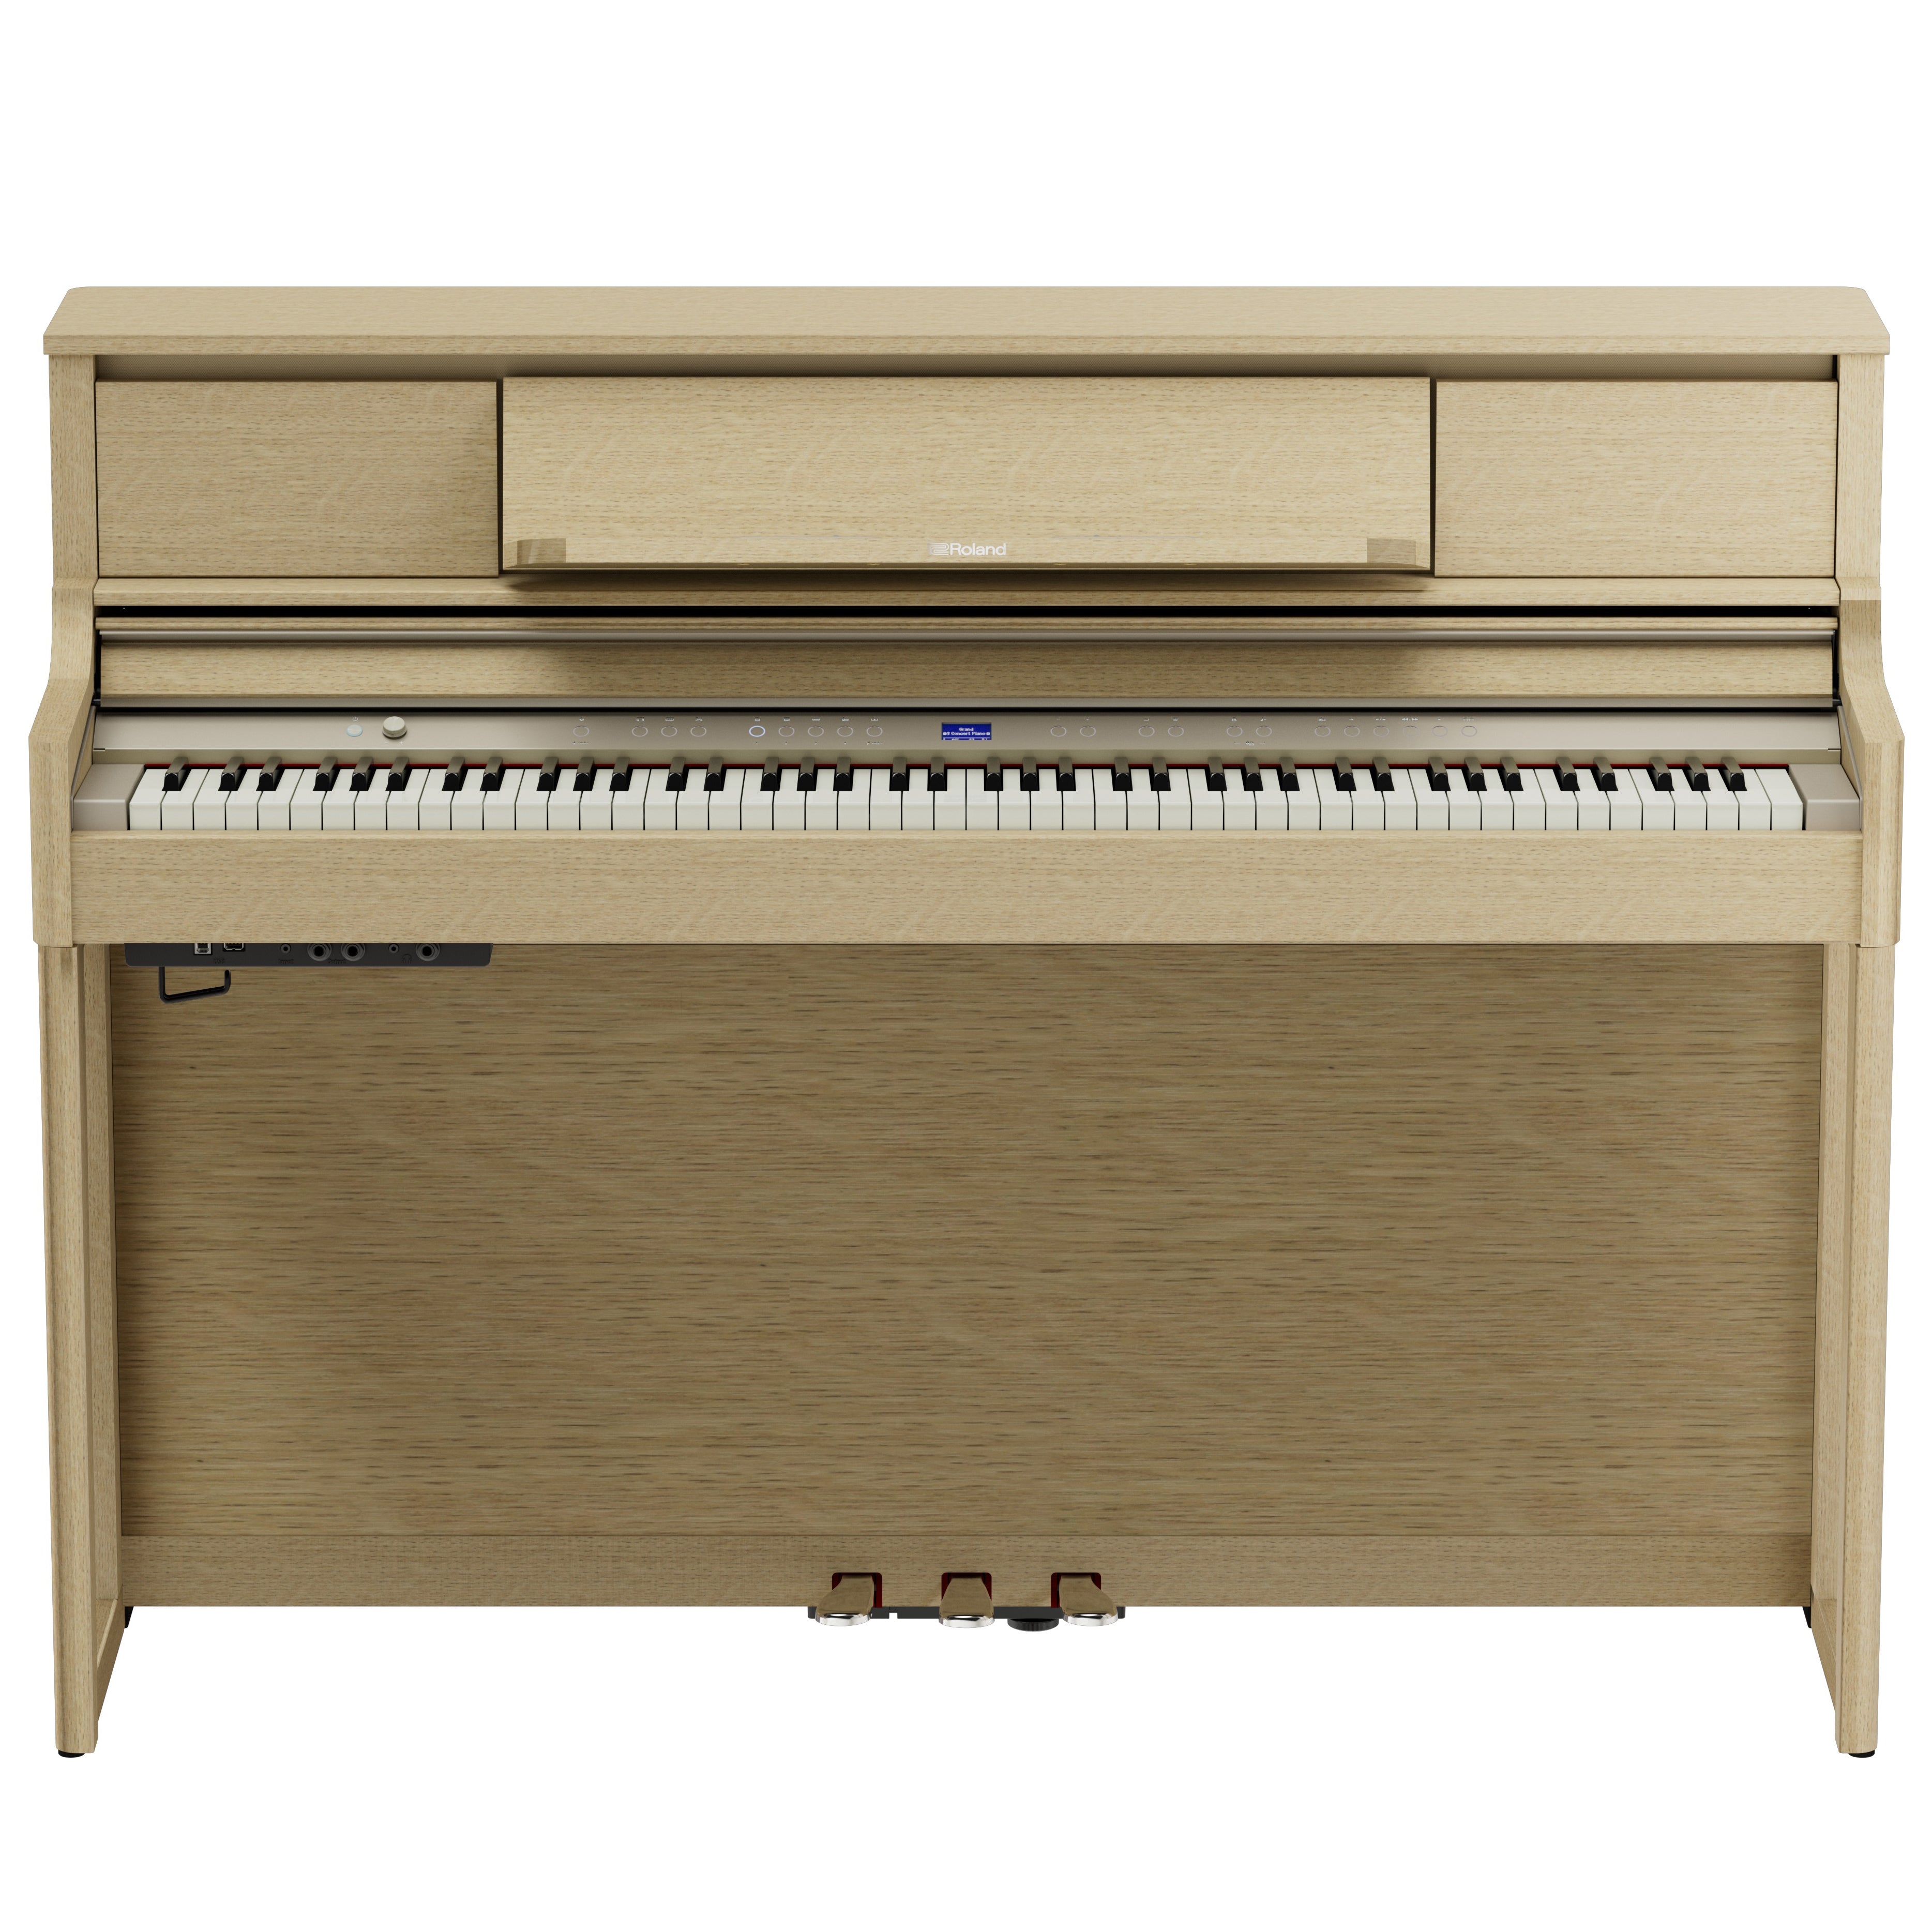 Roland LX-5 Digital Piano with Bench - Light Oak - View 2